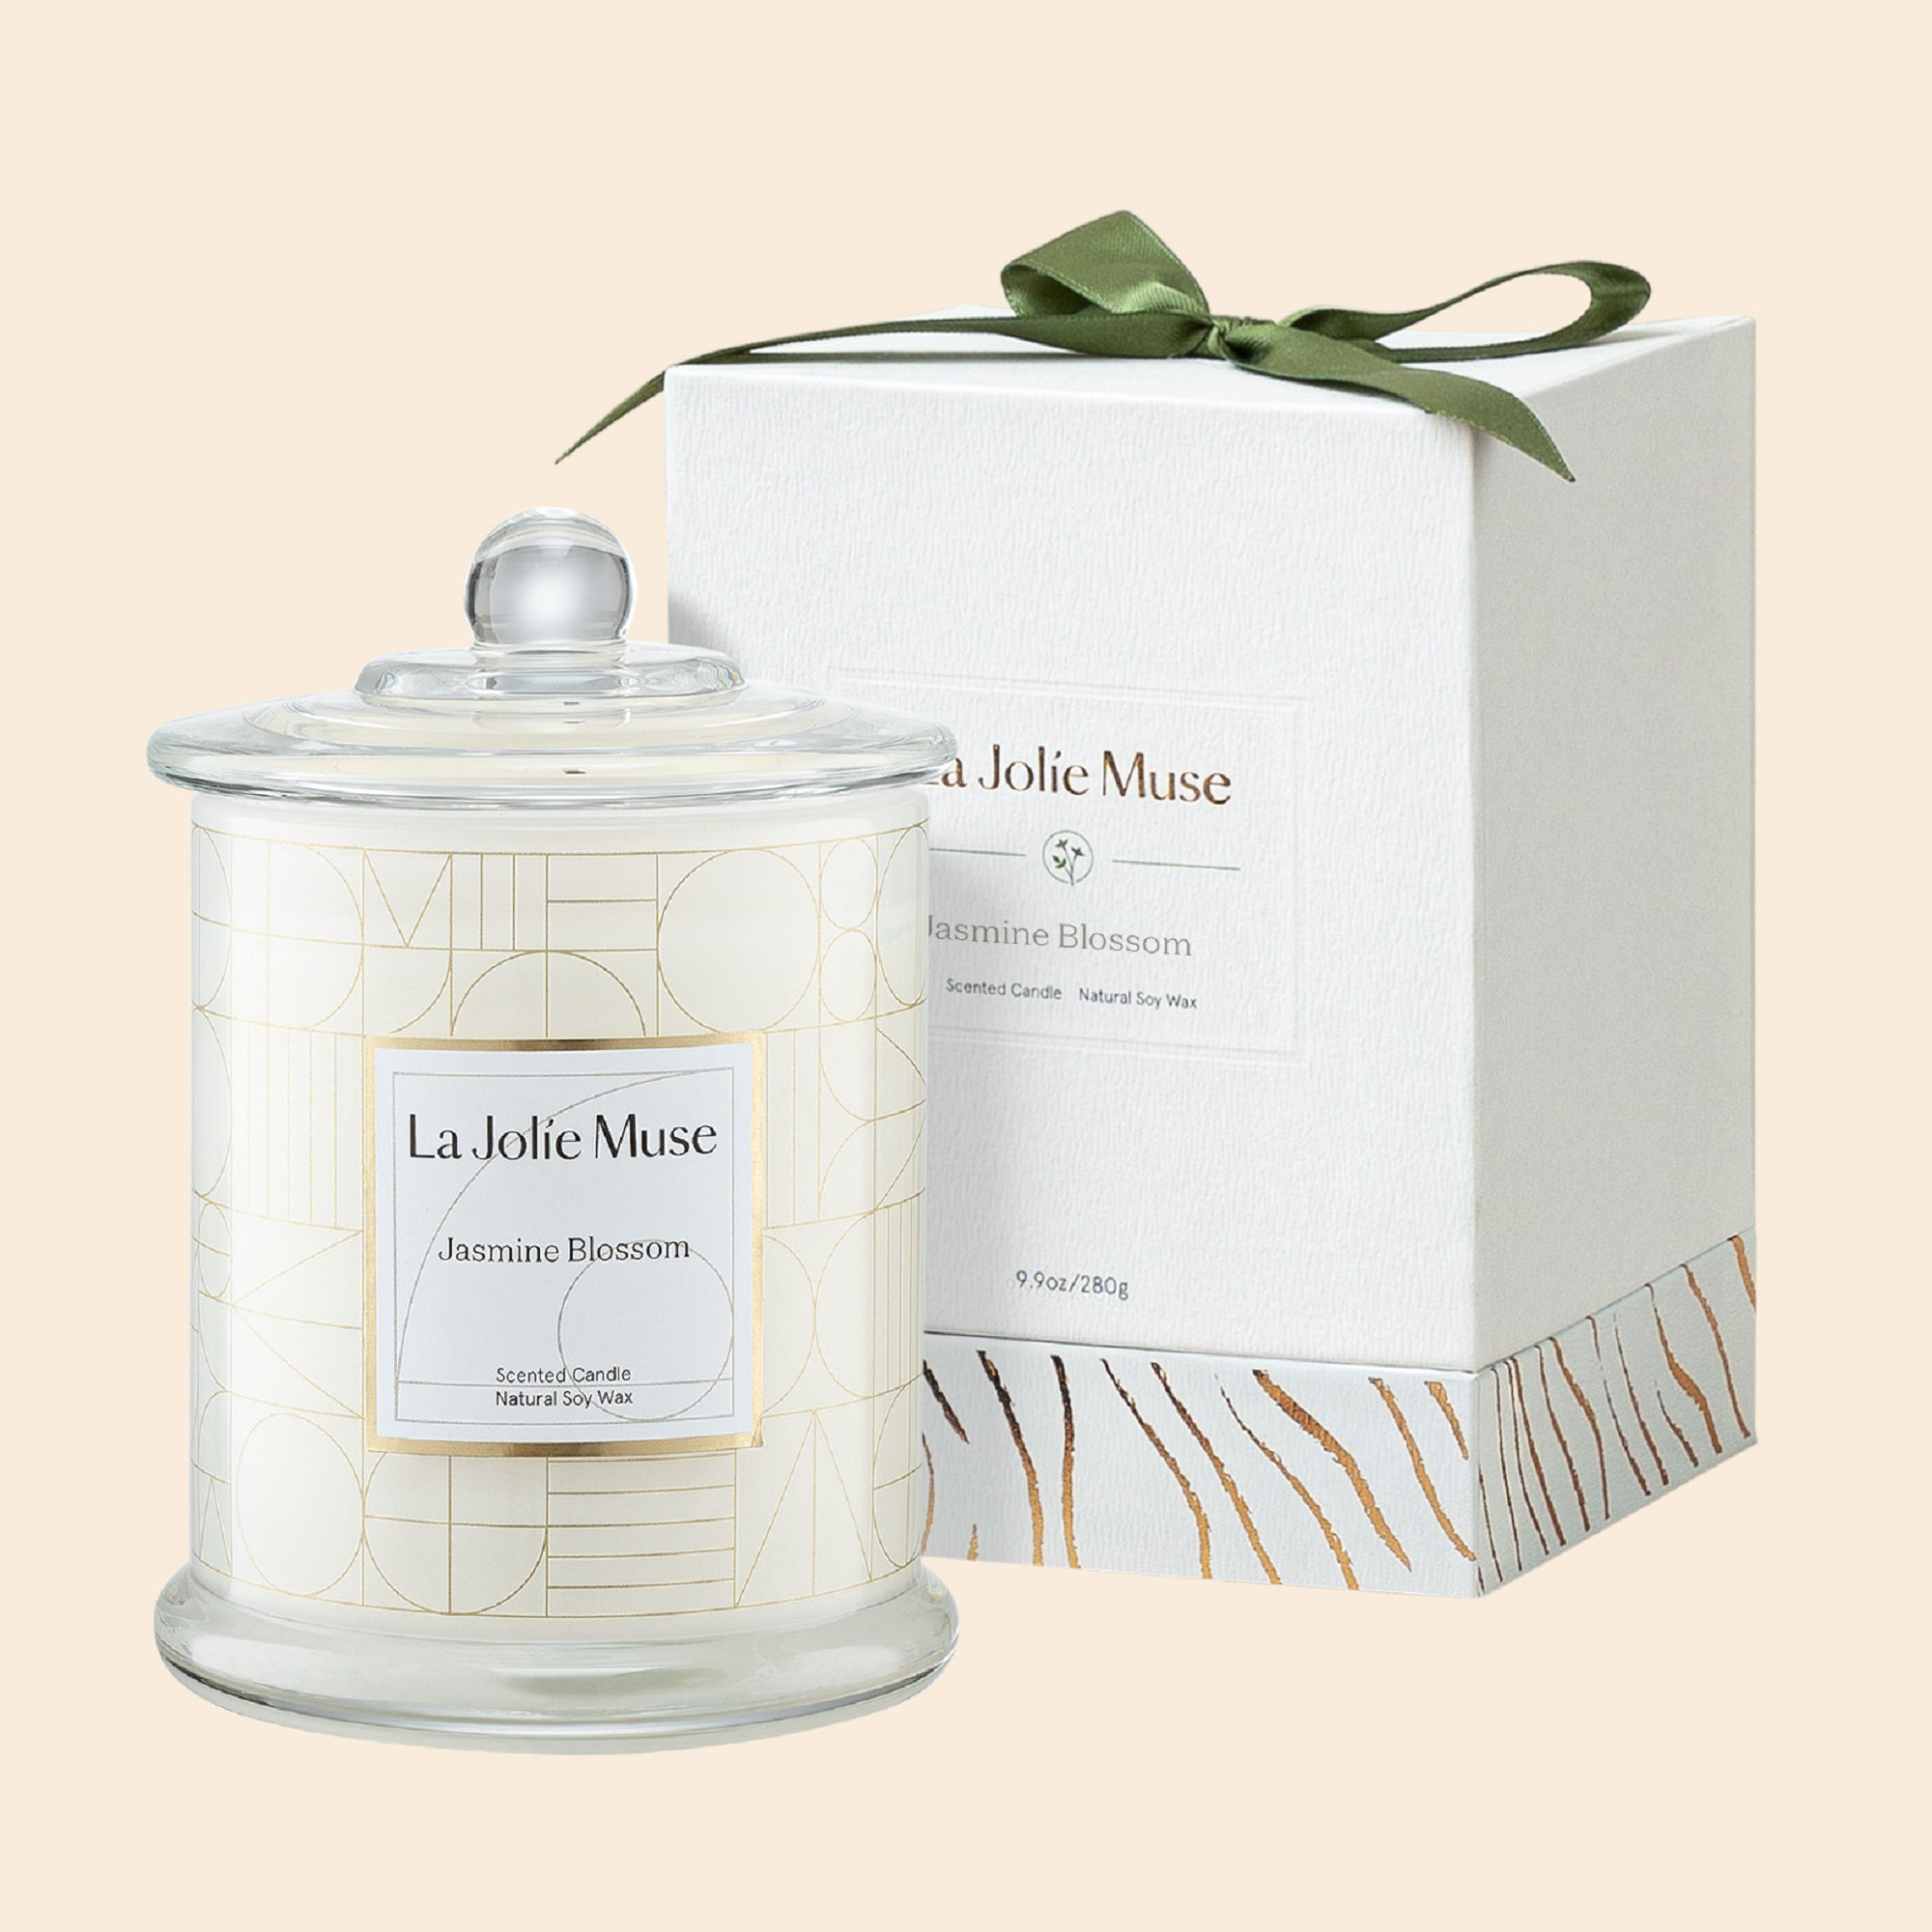 Twine Wrapped Glitter Soy Candle-Making for Gifts or Holidays